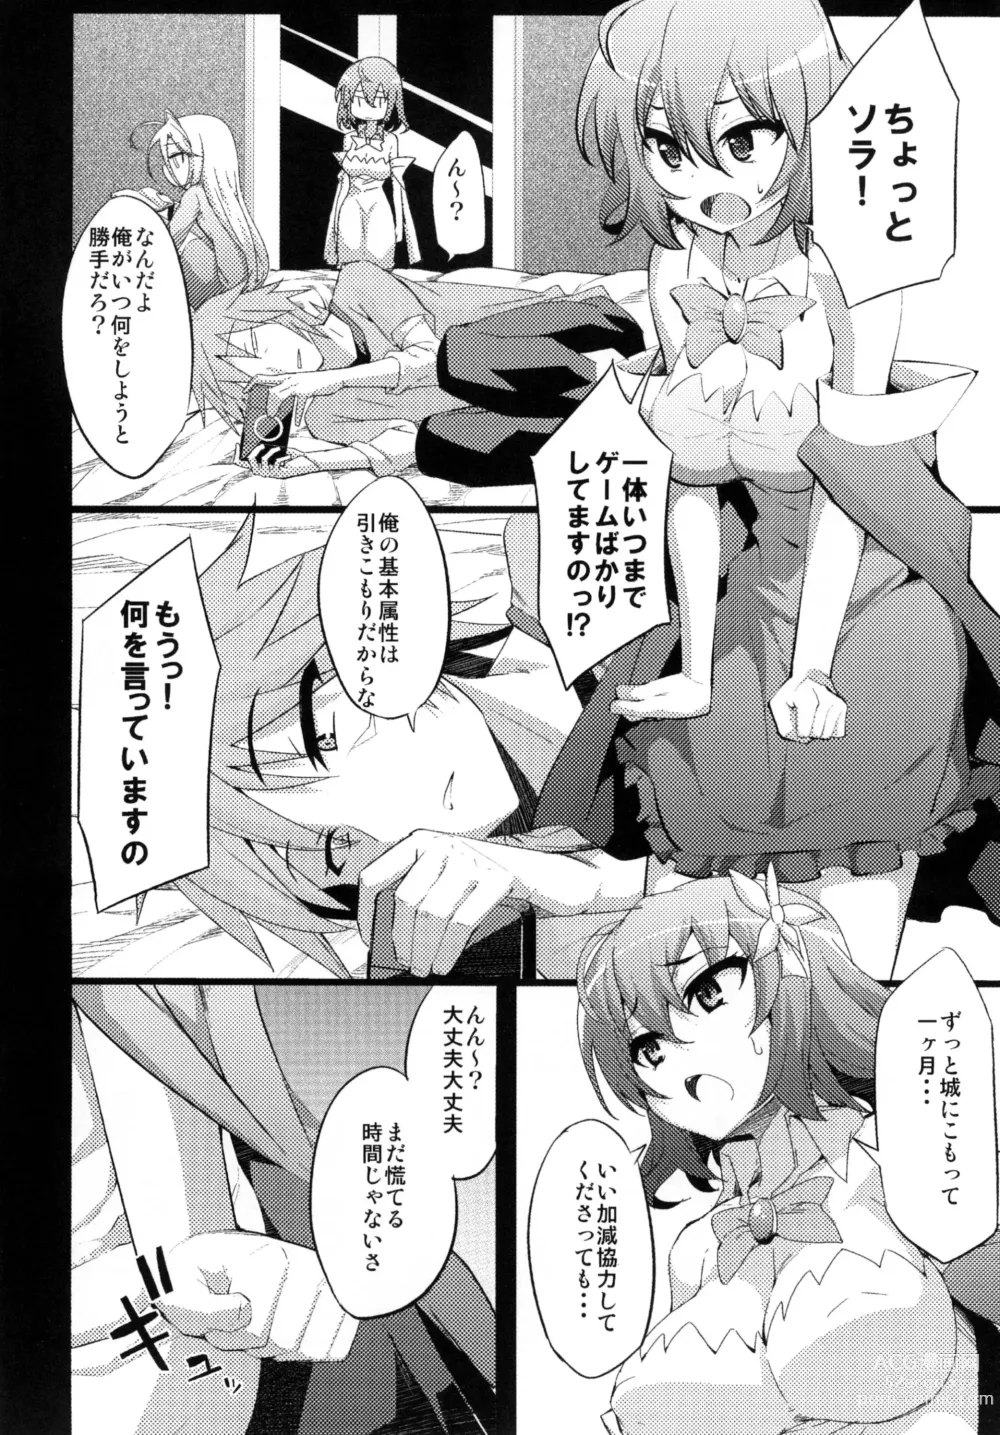 Page 3 of doujinshi Steph Game